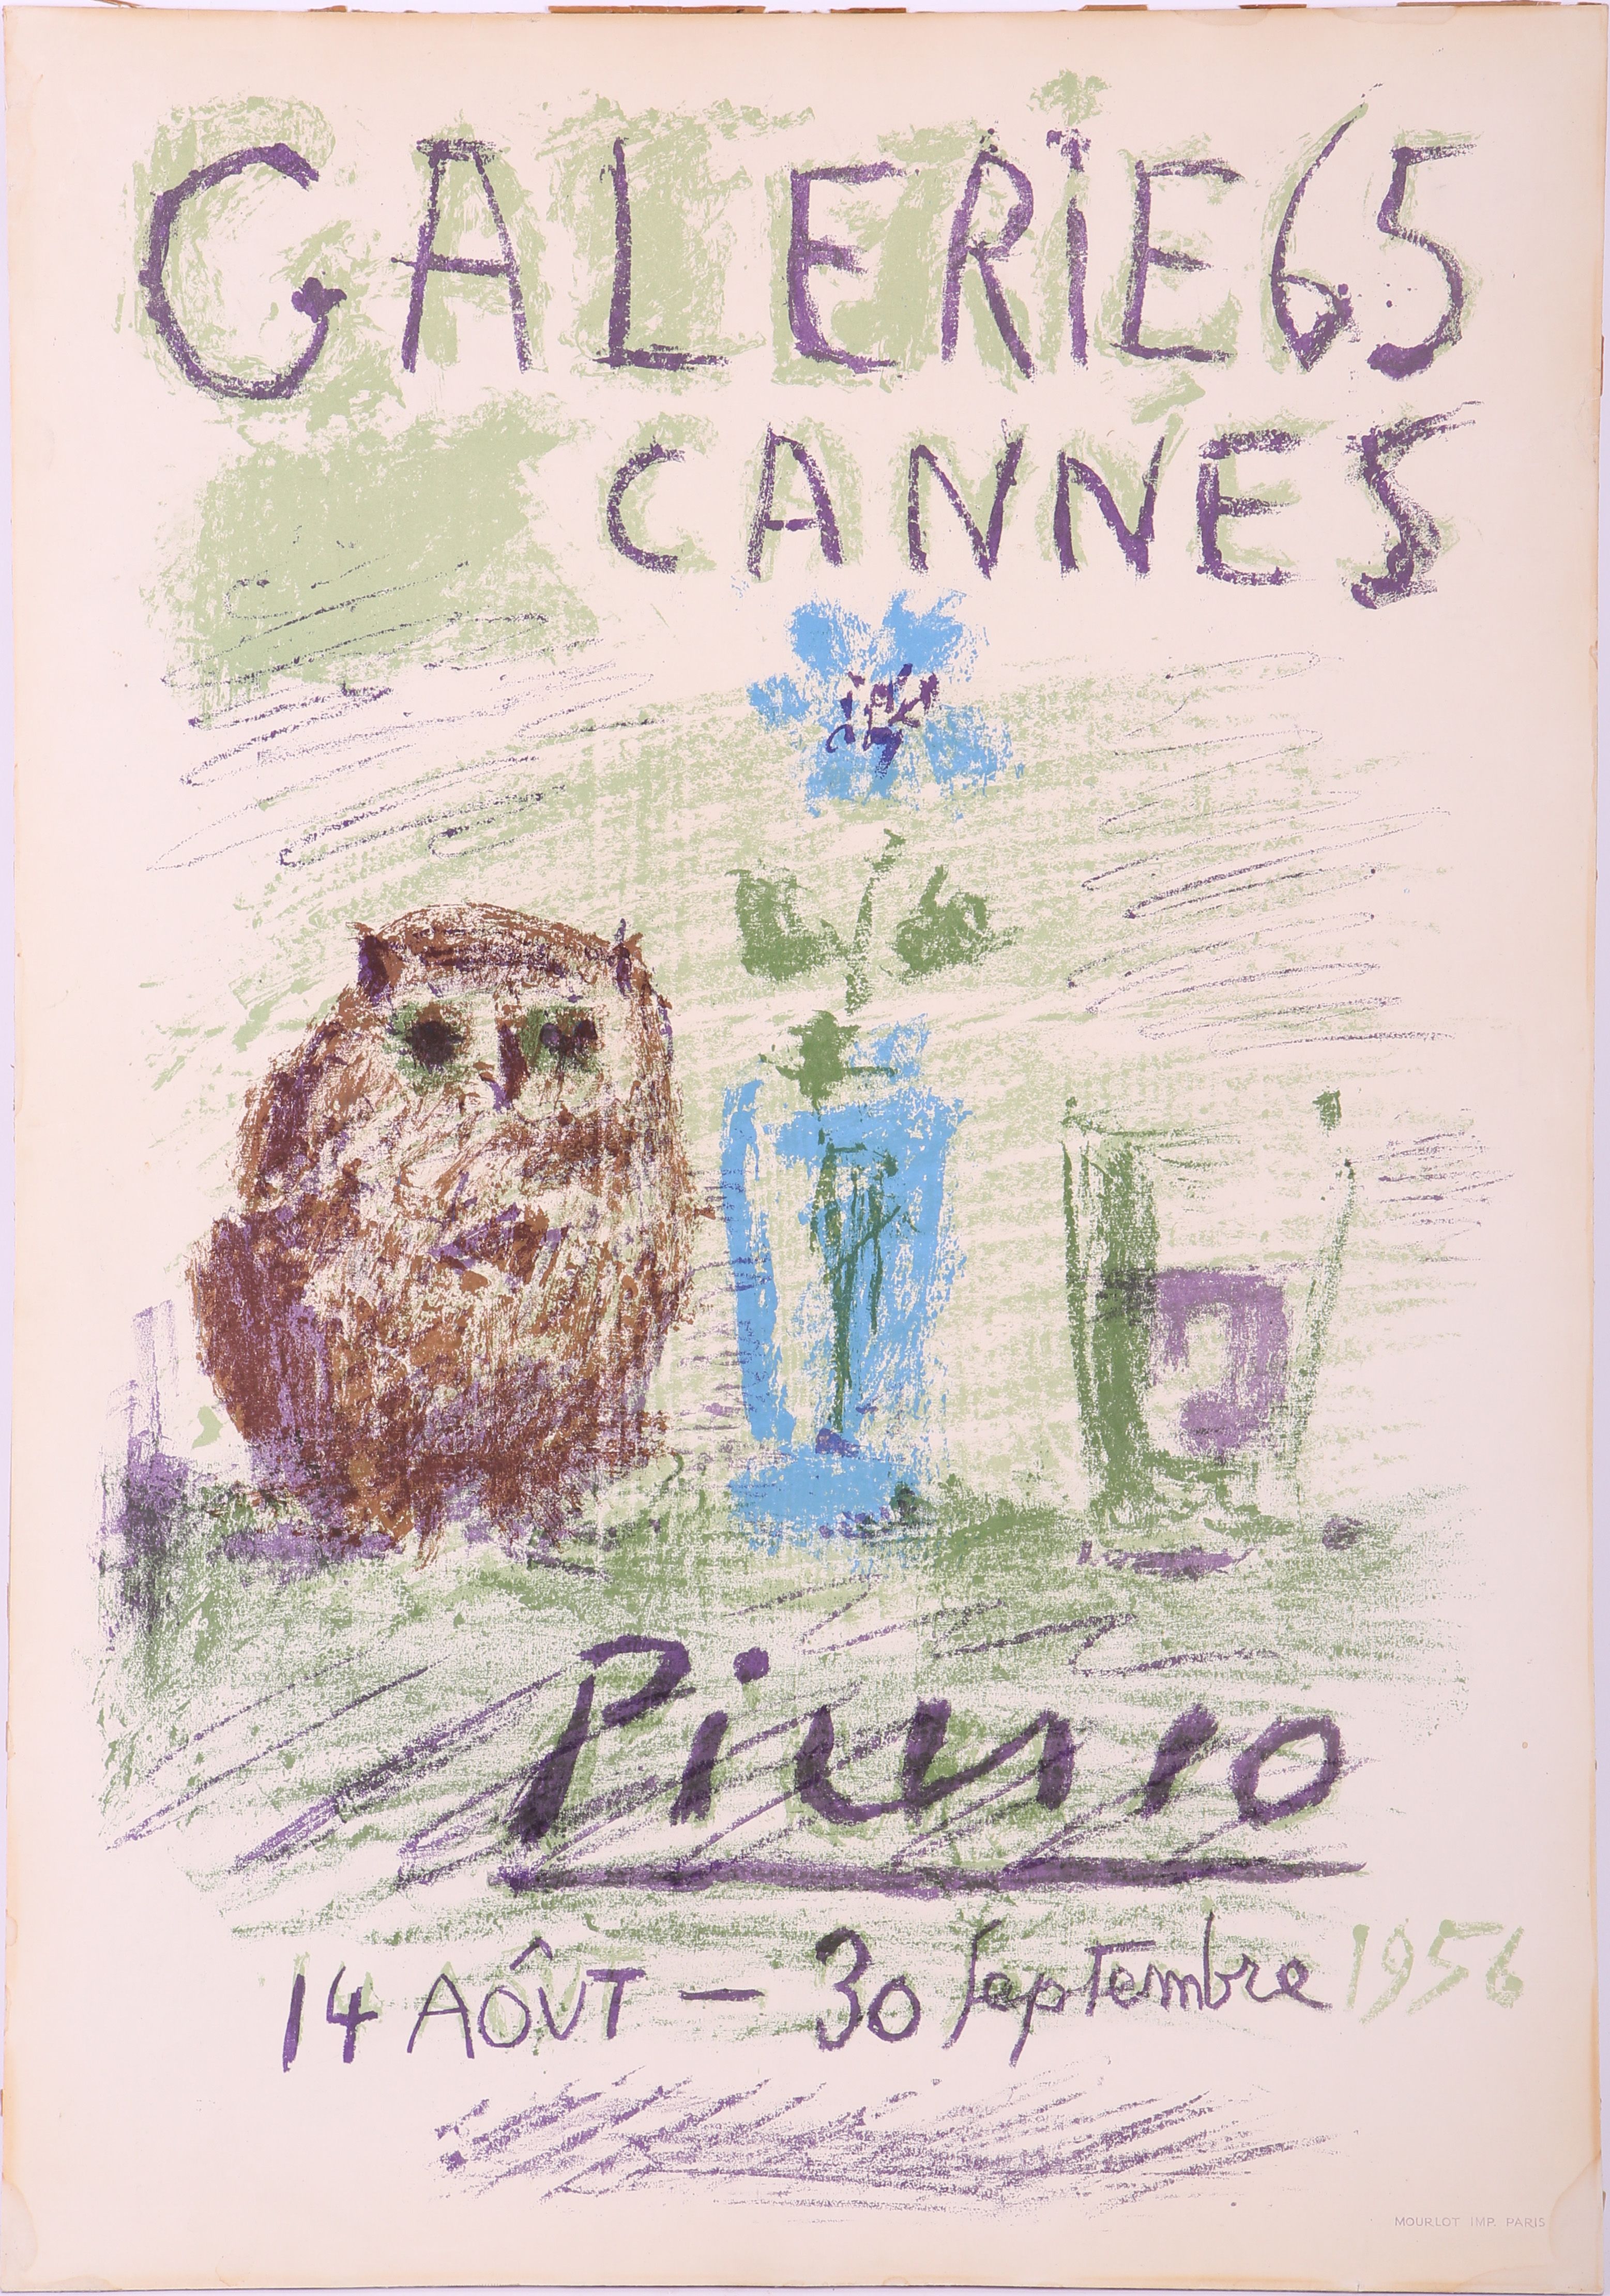 Pablo Picasso (1881-1973), "Owl, Glass and Flower - Galerie 65, Cannes", lithograph printed in - Image 2 of 2